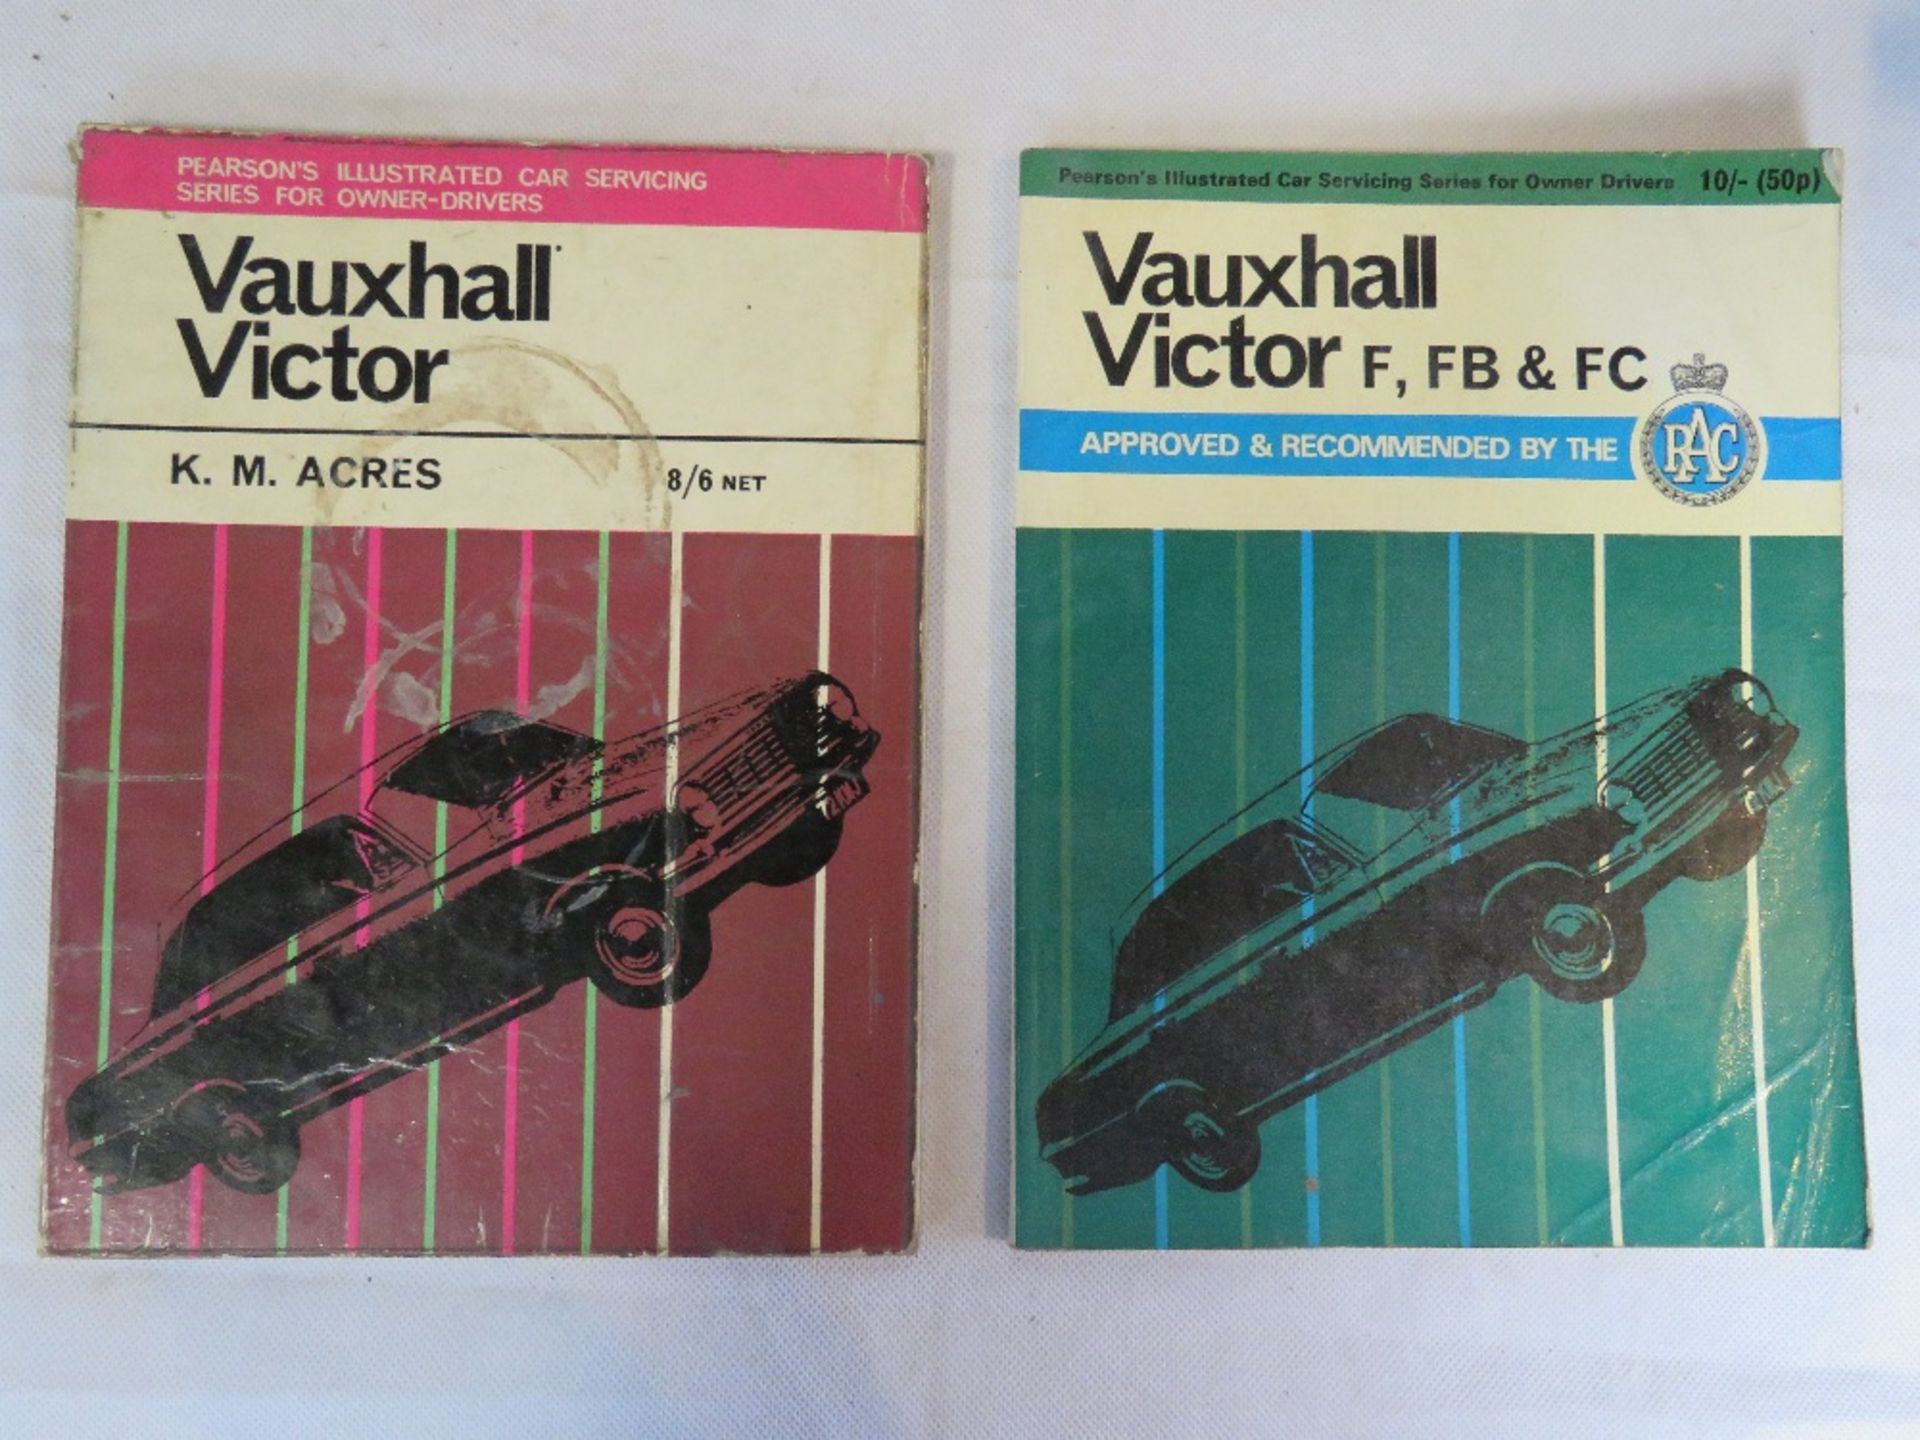 A quantity of Vauxhall handbooks and Pearson's car servicing books. - Image 4 of 5